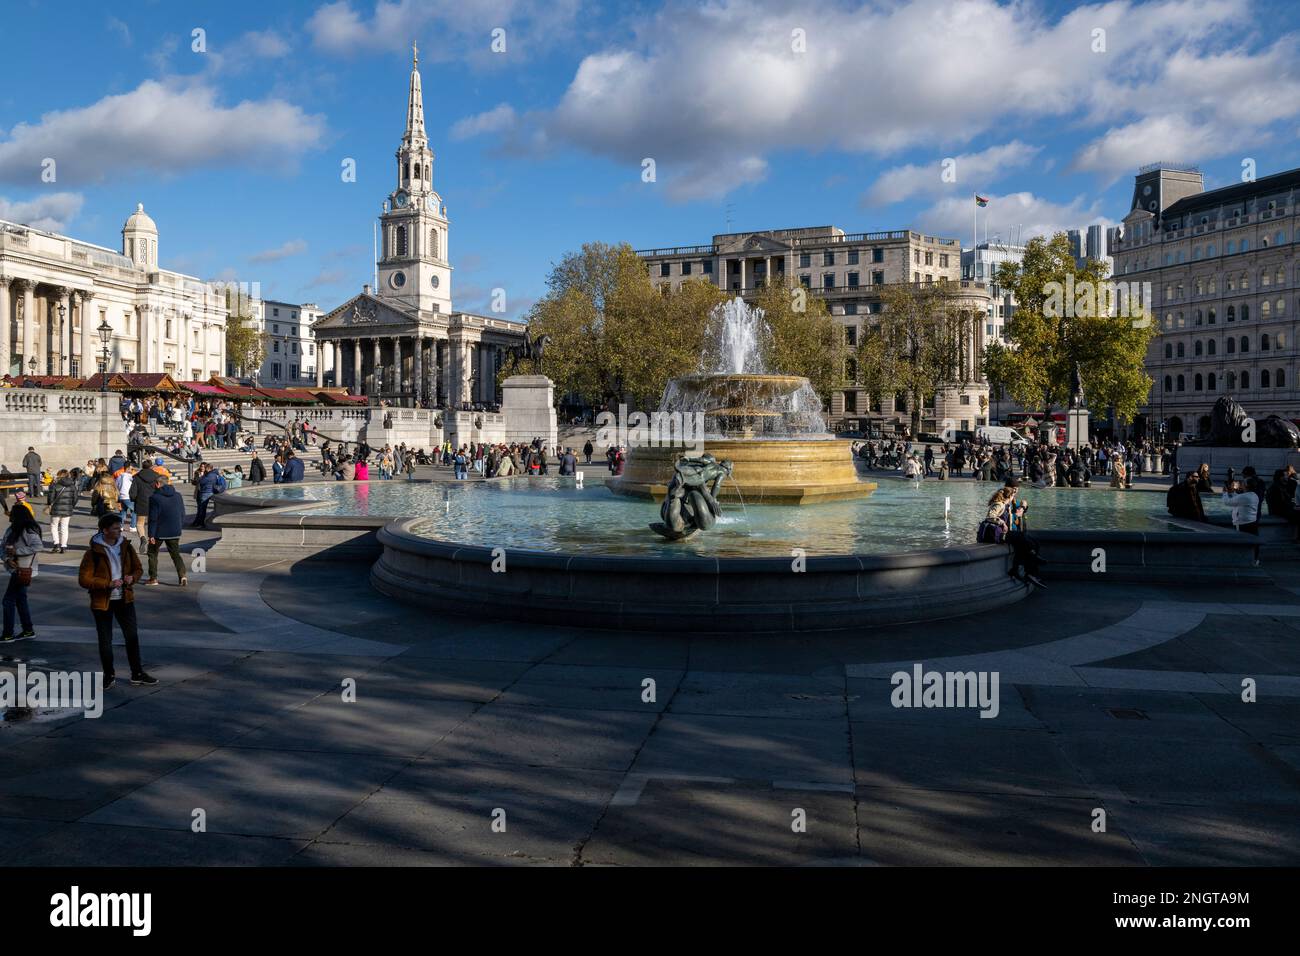 A view across Trafalgar Square looking east. Part of the National Gallery can be seen on the left as well as the church of Saint Martin-in the-Fields. Stock Photo